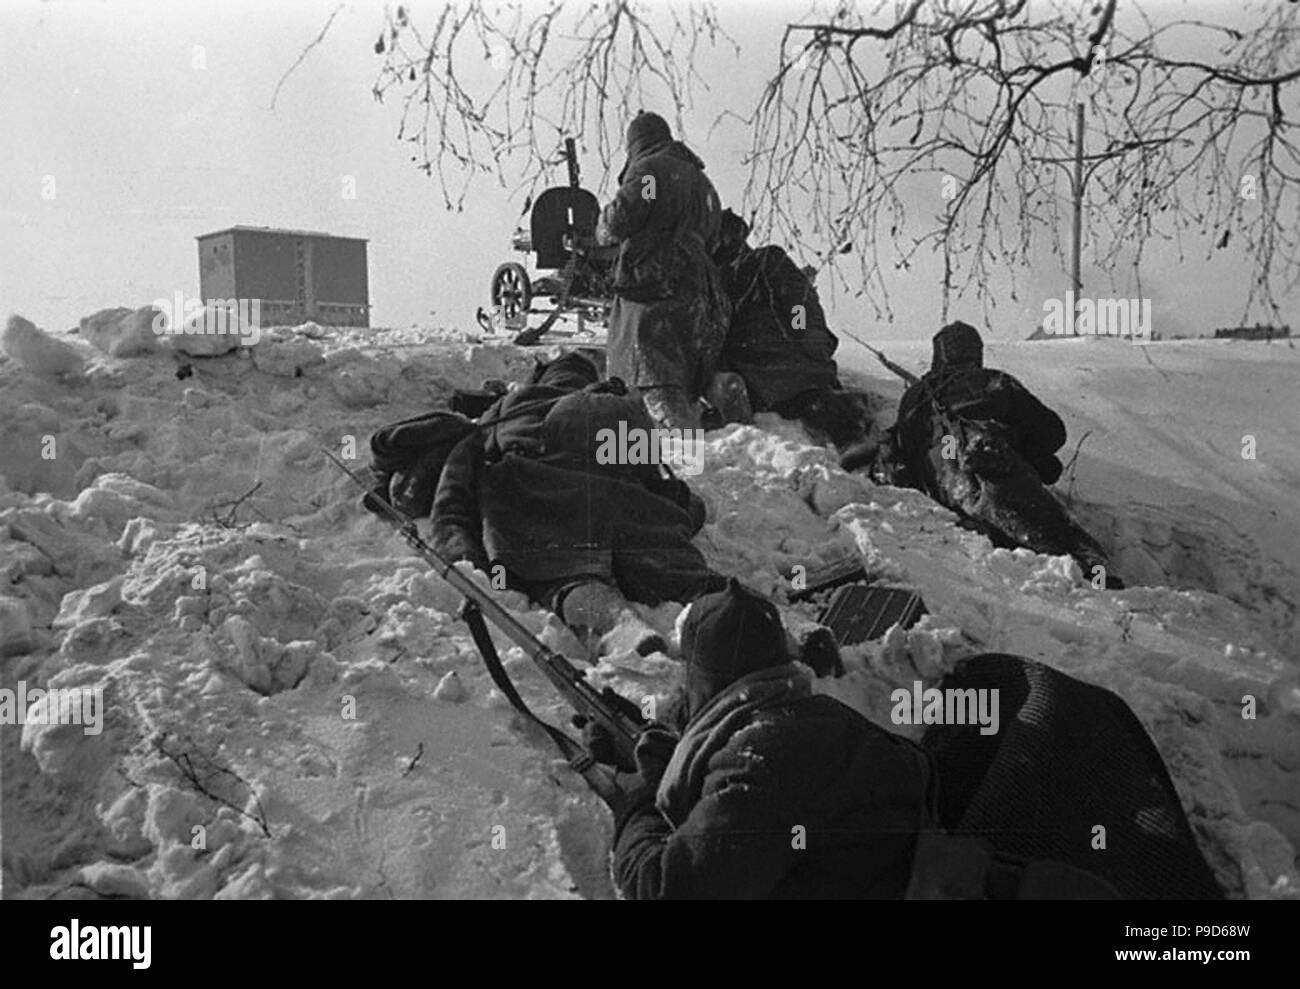 Red Army soldiers. The Winter War. 1940. Museum: Russian State Film and Photo Archive, Krasnogorsk. Stock Photo